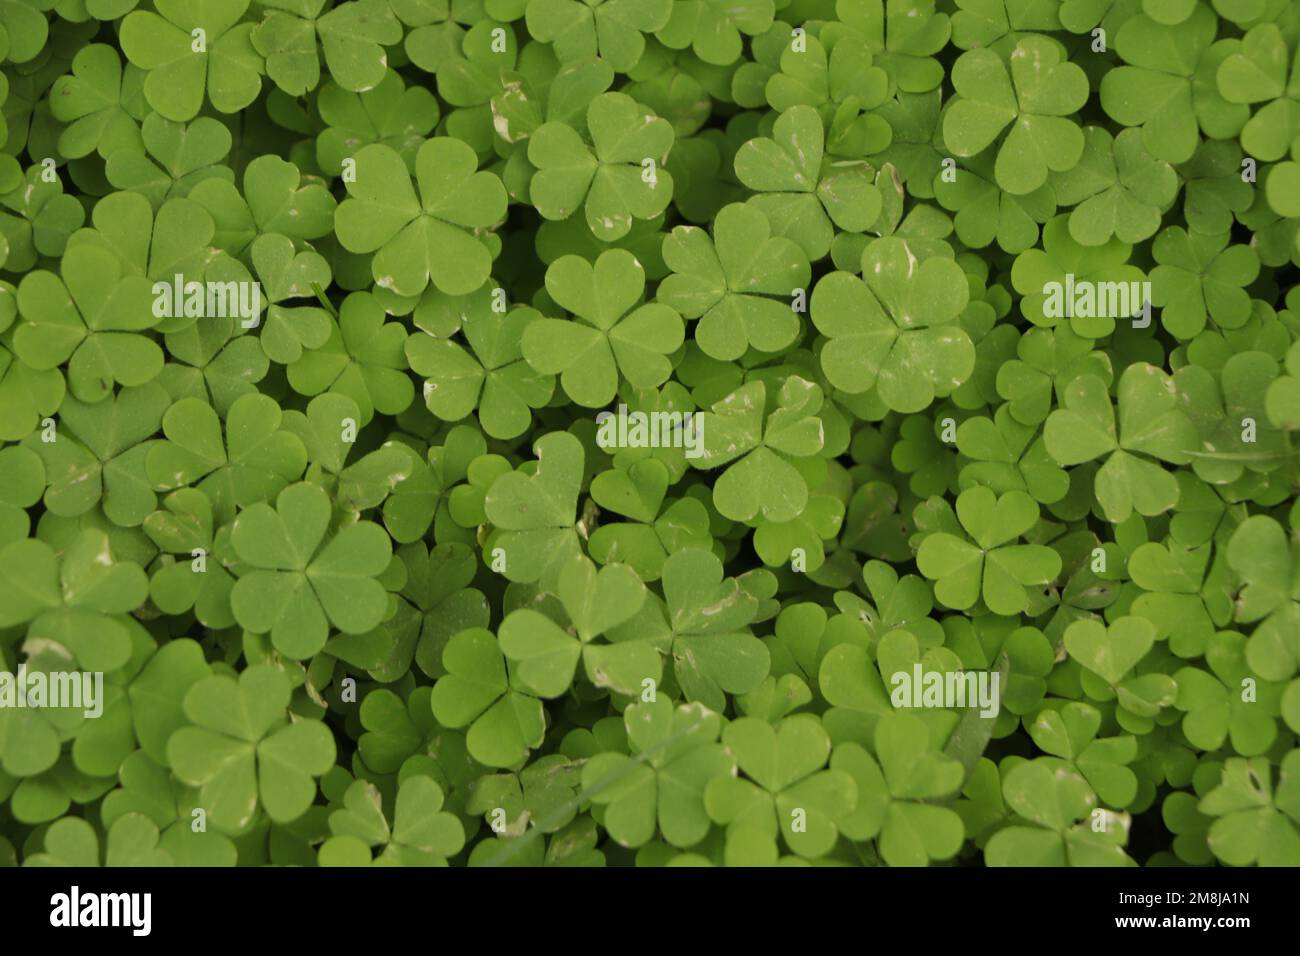 Green leaves pattern,leaf Shamrock or water clover background Stock Photo